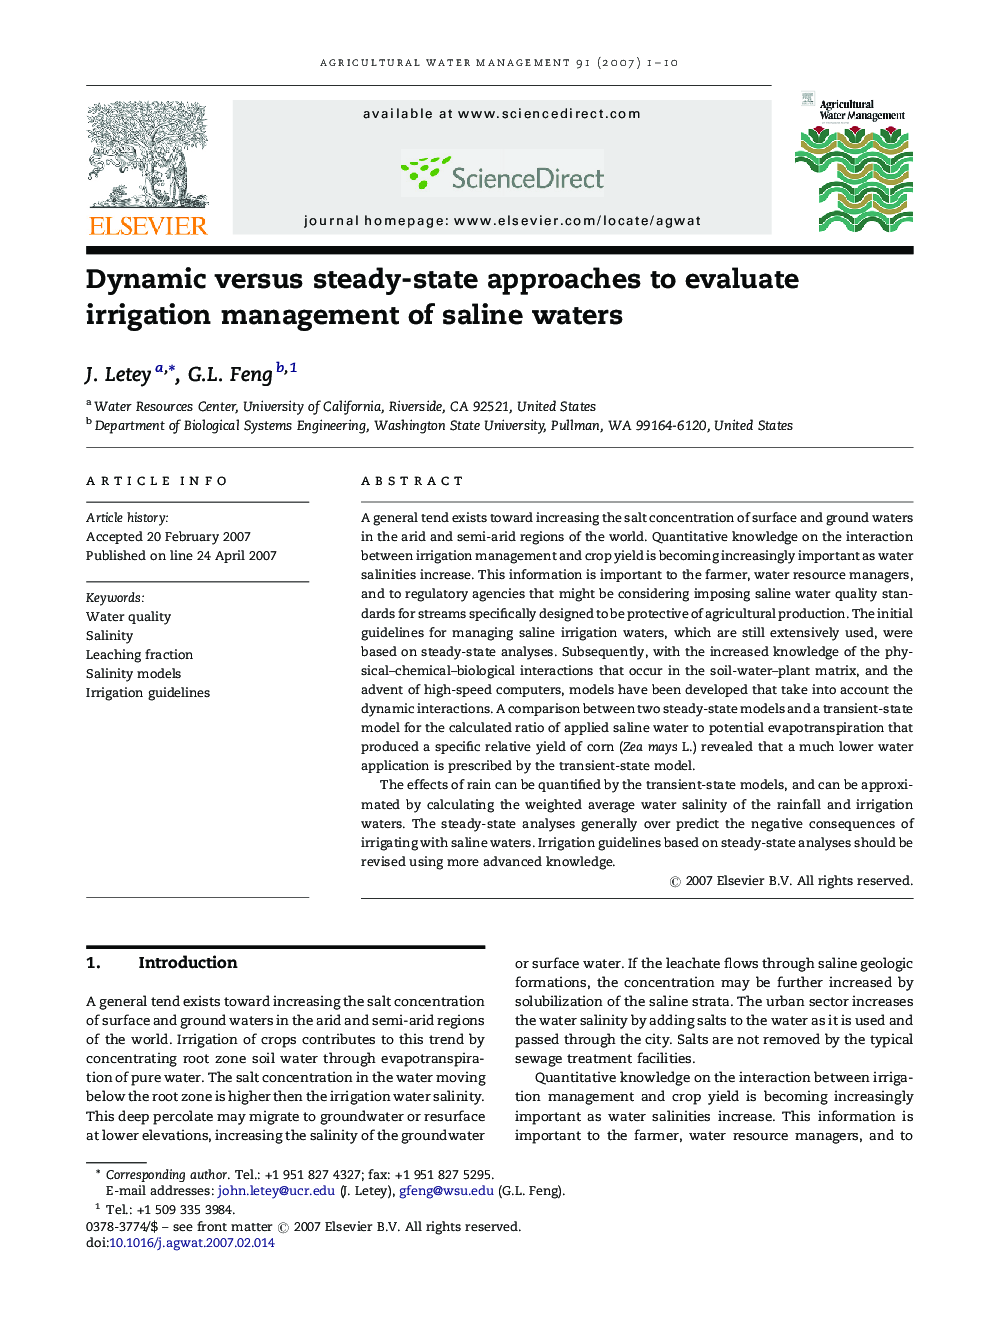 Dynamic versus steady-state approaches to evaluate irrigation management of saline waters